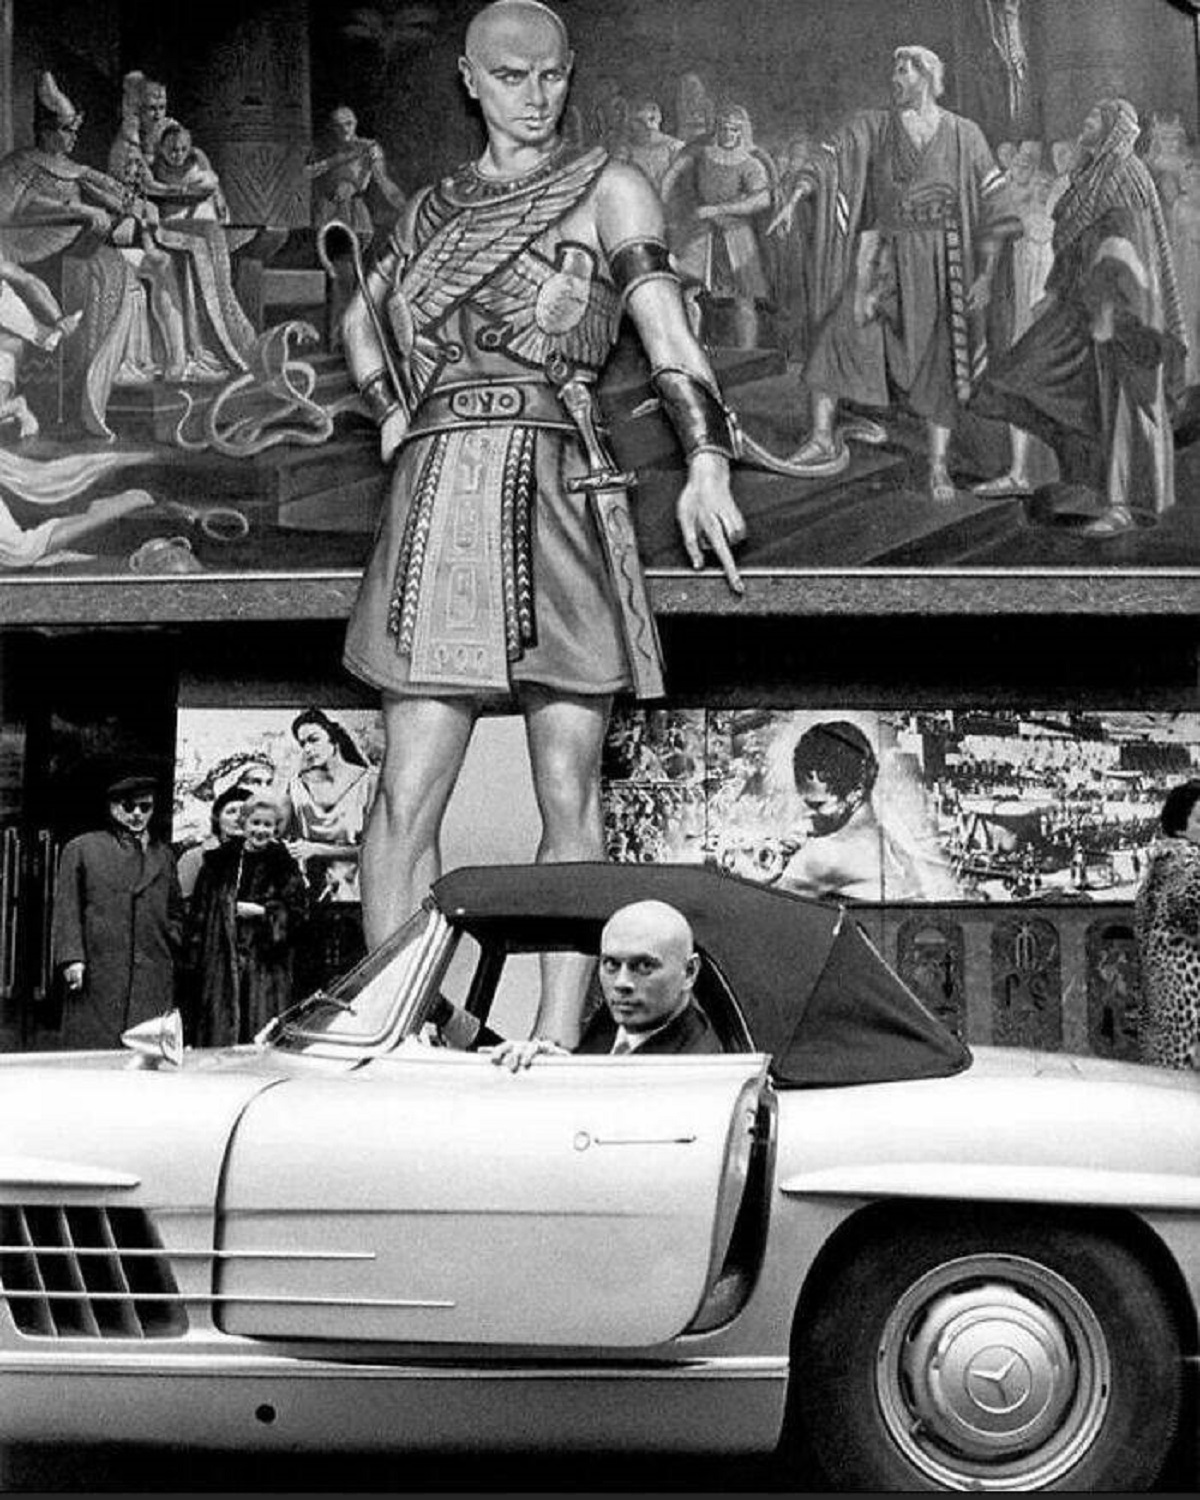 "Actor Yul Brynner Arriving To The Premiere Of The Movie "The Ten Commandments" In His Mercedes 300 Sl Roadster, 1956"